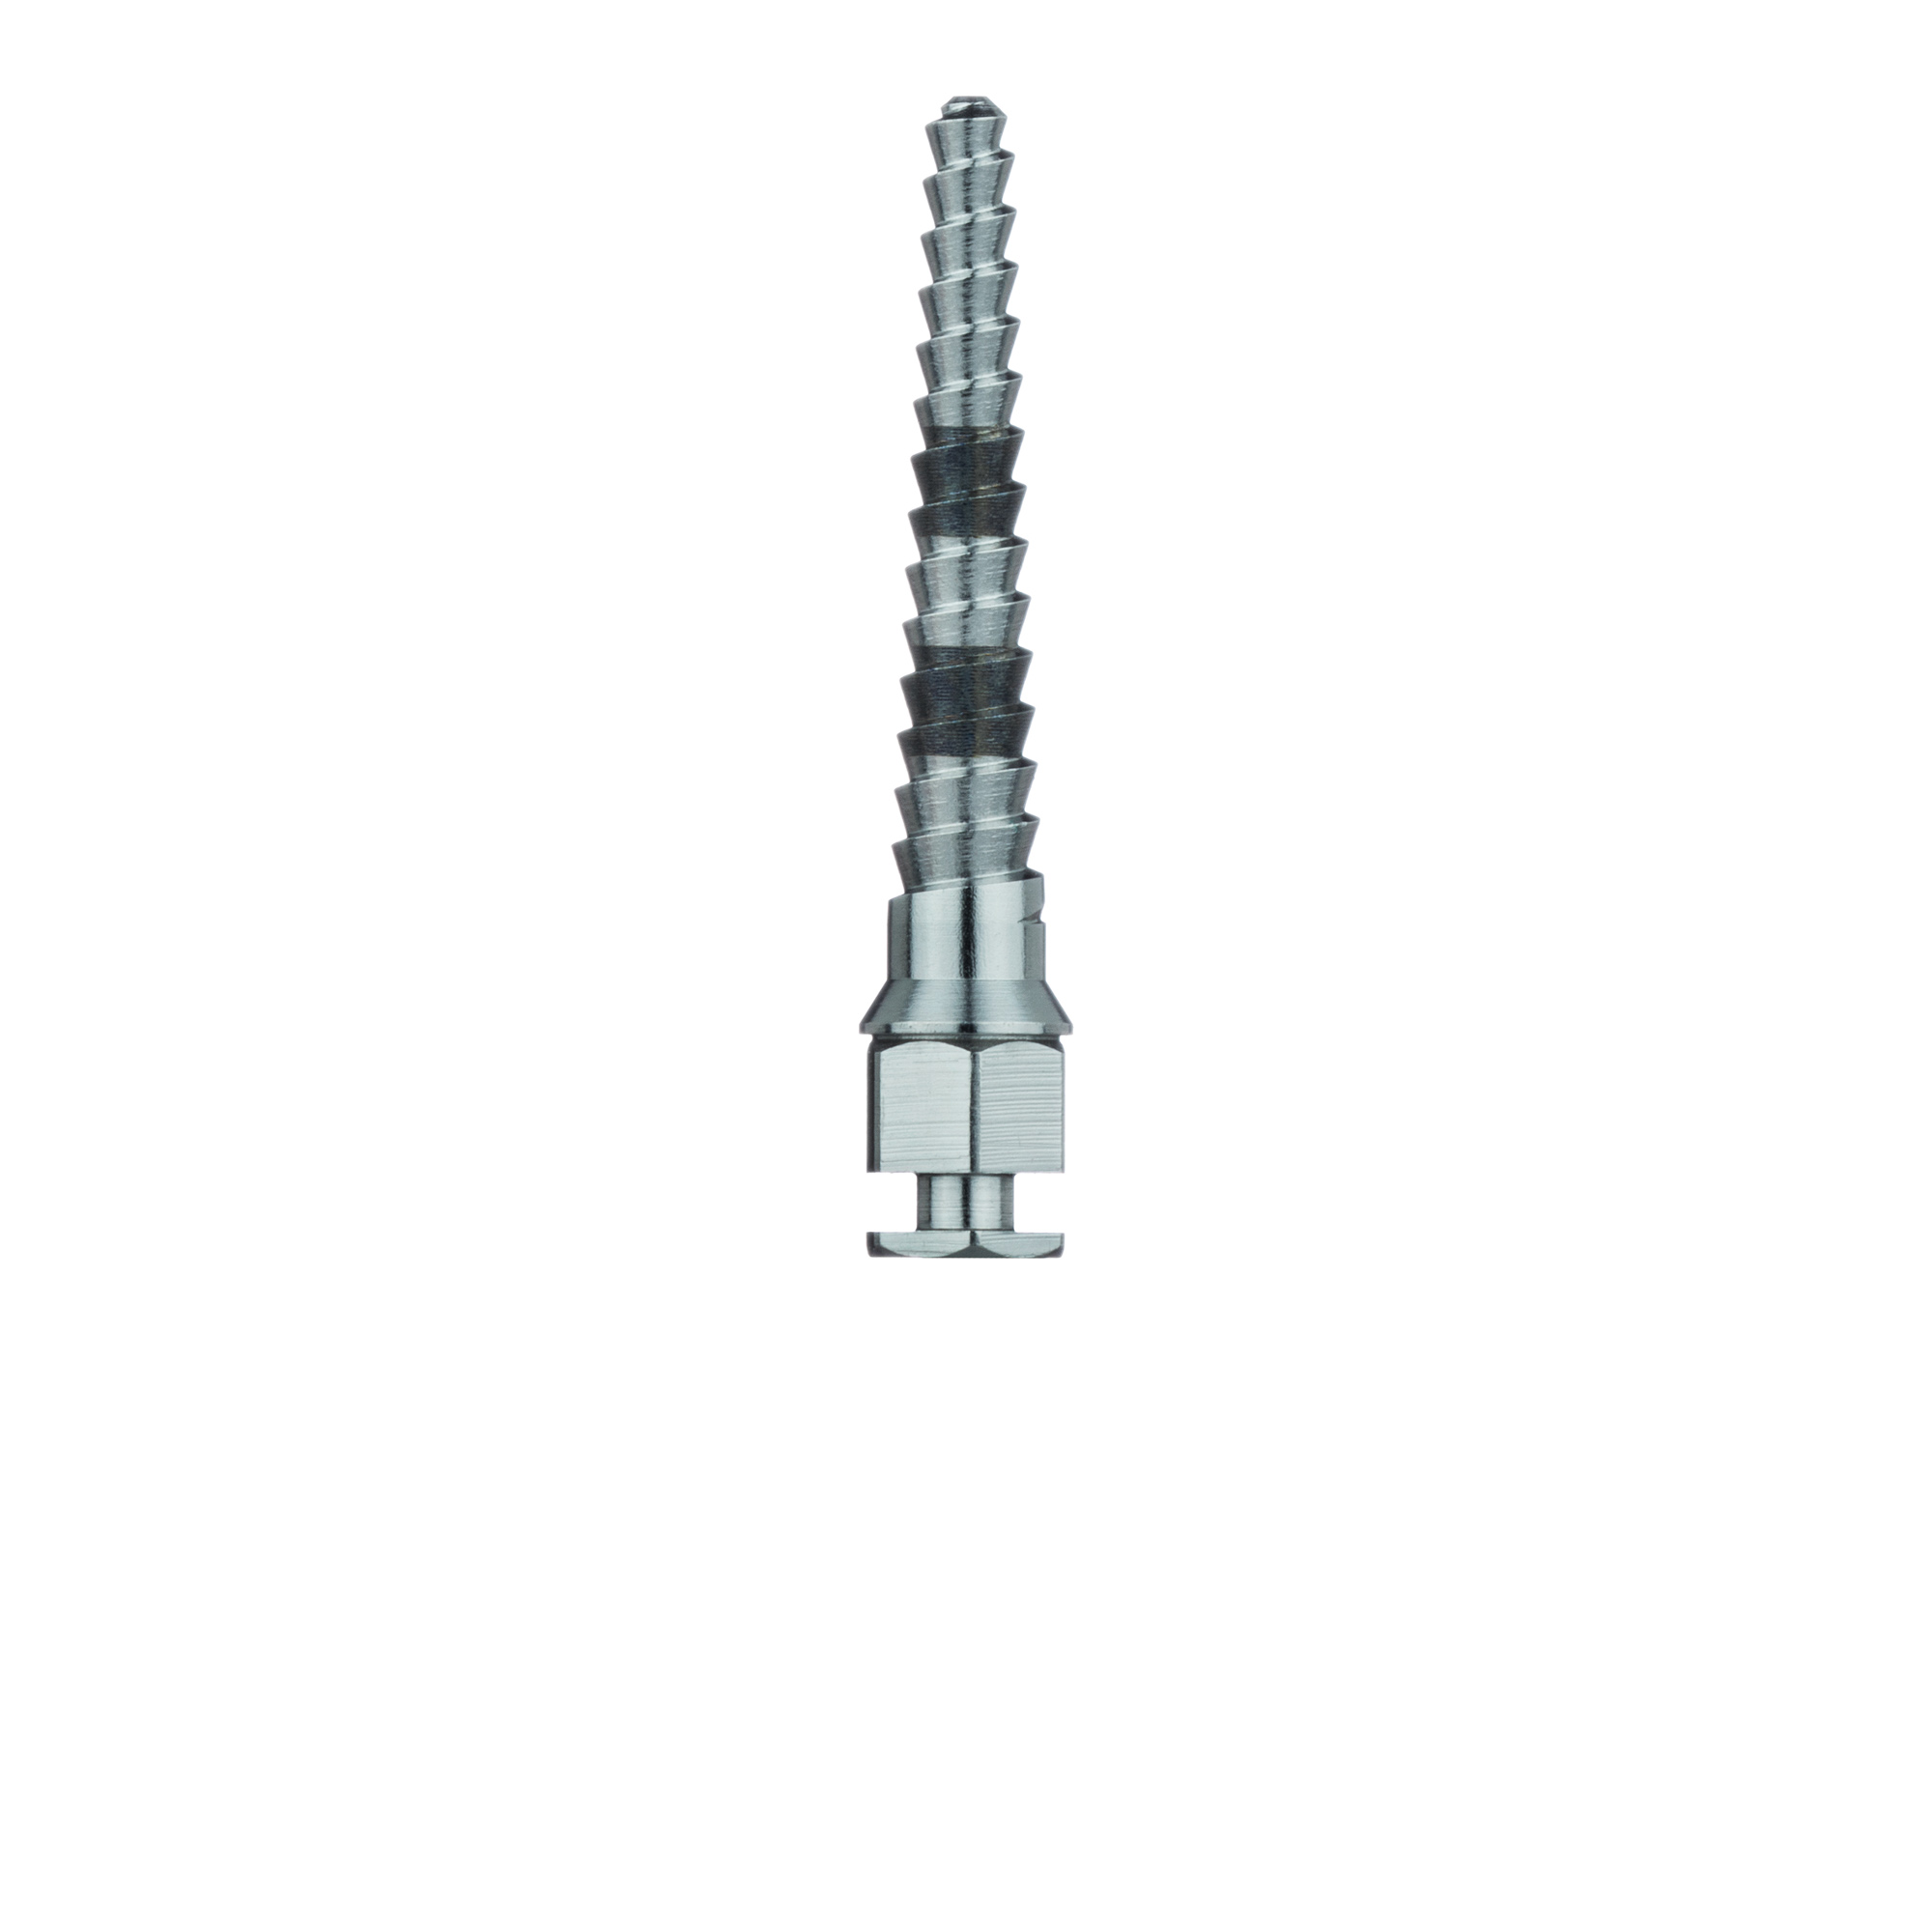 B1005-029 Surgery, Expansion Spreader, 2.9mm X 15mm